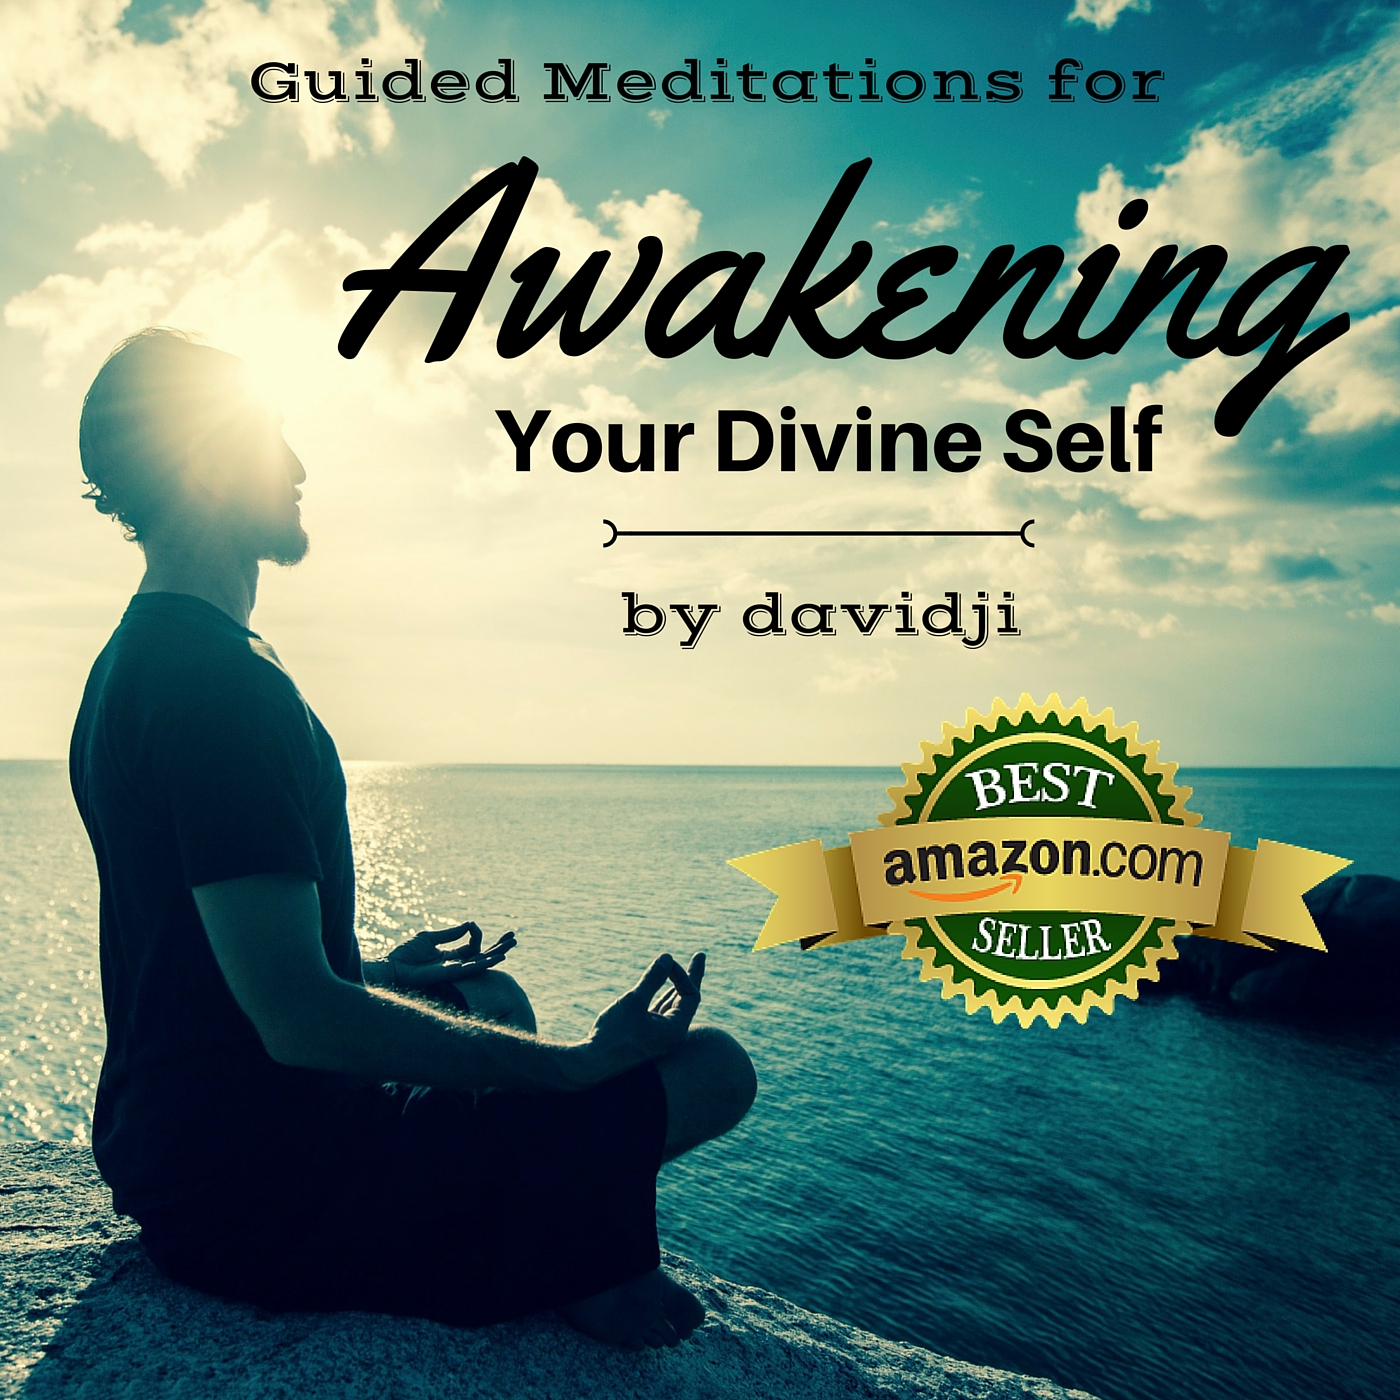 guided meditations for awakening your divine self